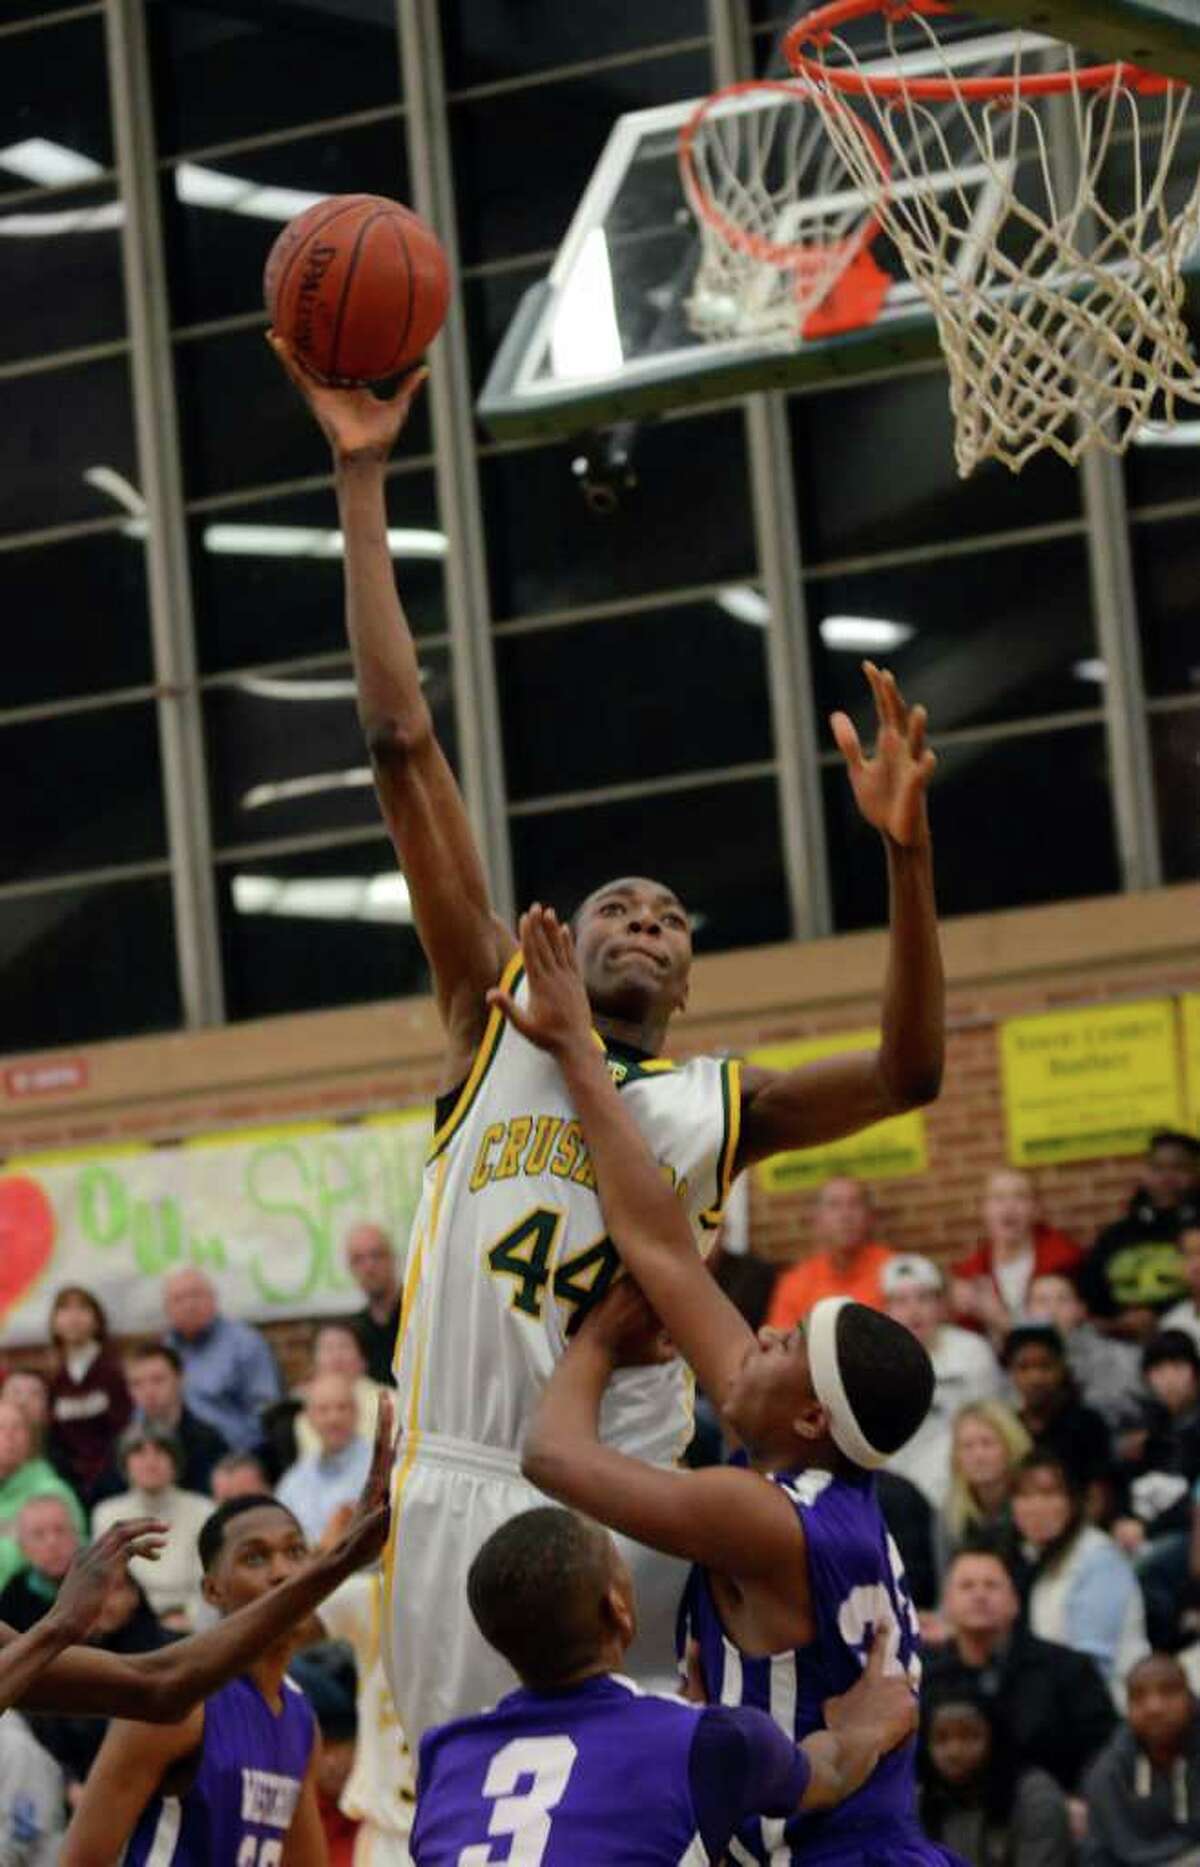 Trinity's Pascal Chukwu (44) goes up for a basket during the boys basketball game against Westhill at Trinity Catholic High School on Friday, Feb. 10, 2012.